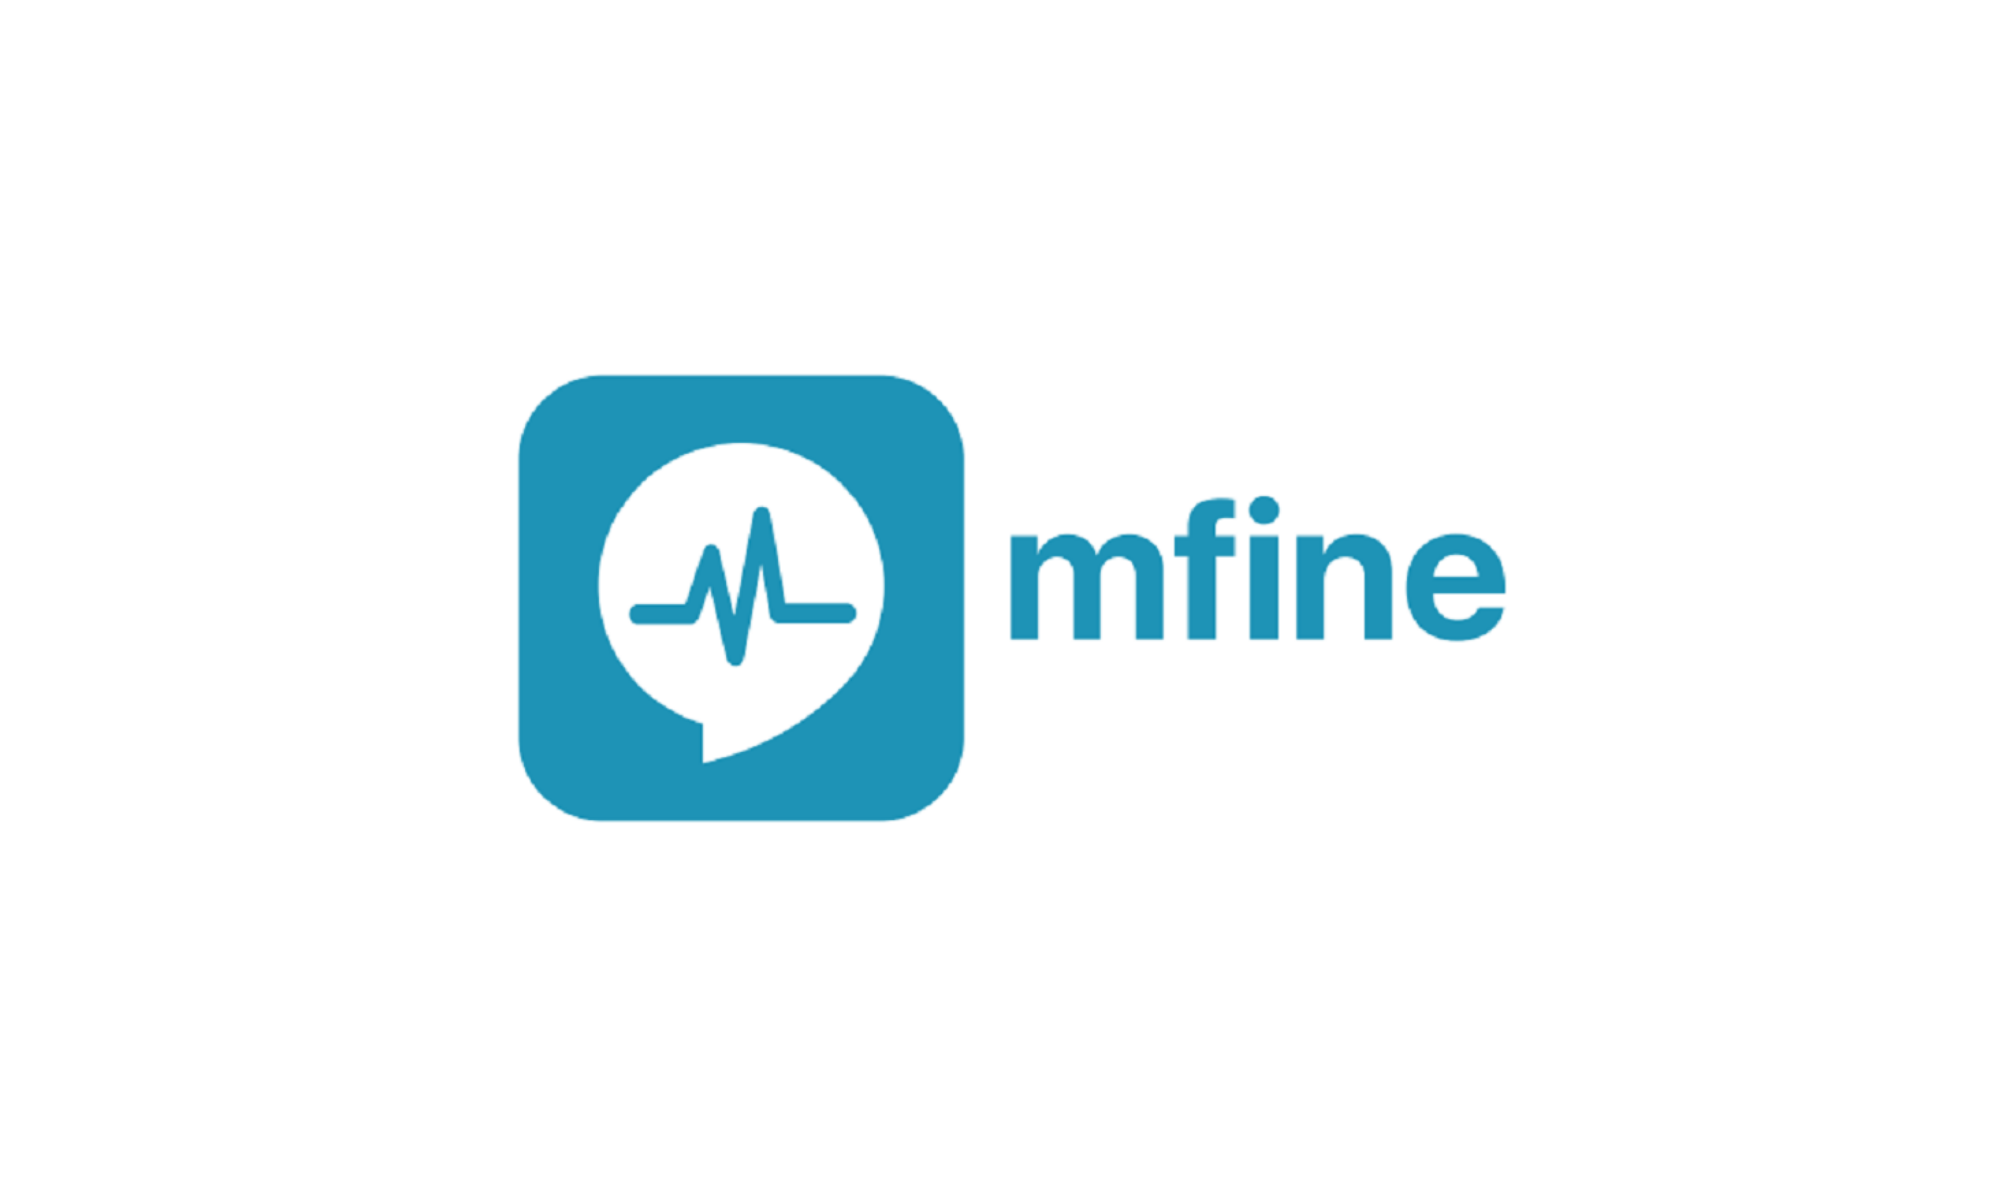 Case Study: How mfine increased brand awareness in Bangalore through city-wide advertising - The Media Ant